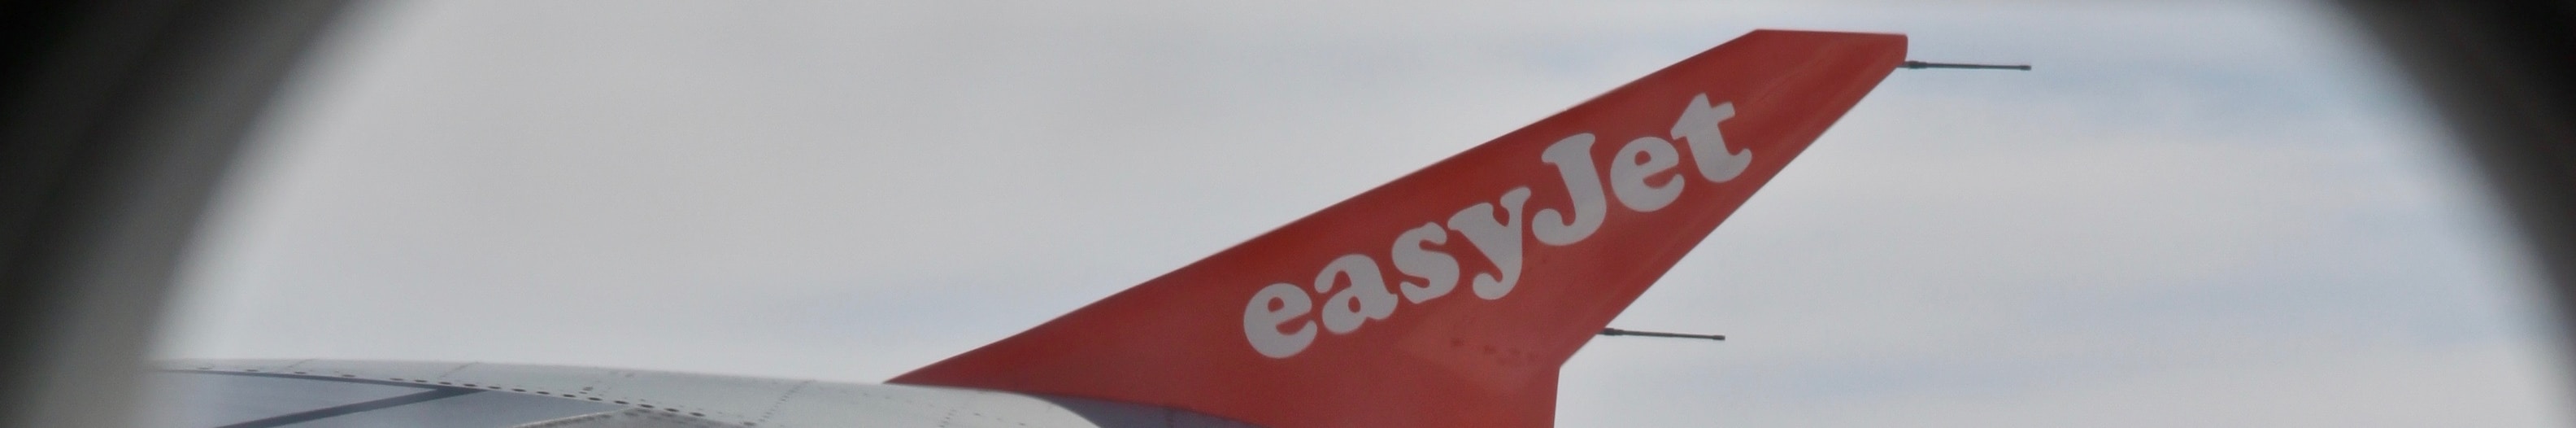 EasyJet ticket costs less than its peers and the nation's, making flying less costly for its clients